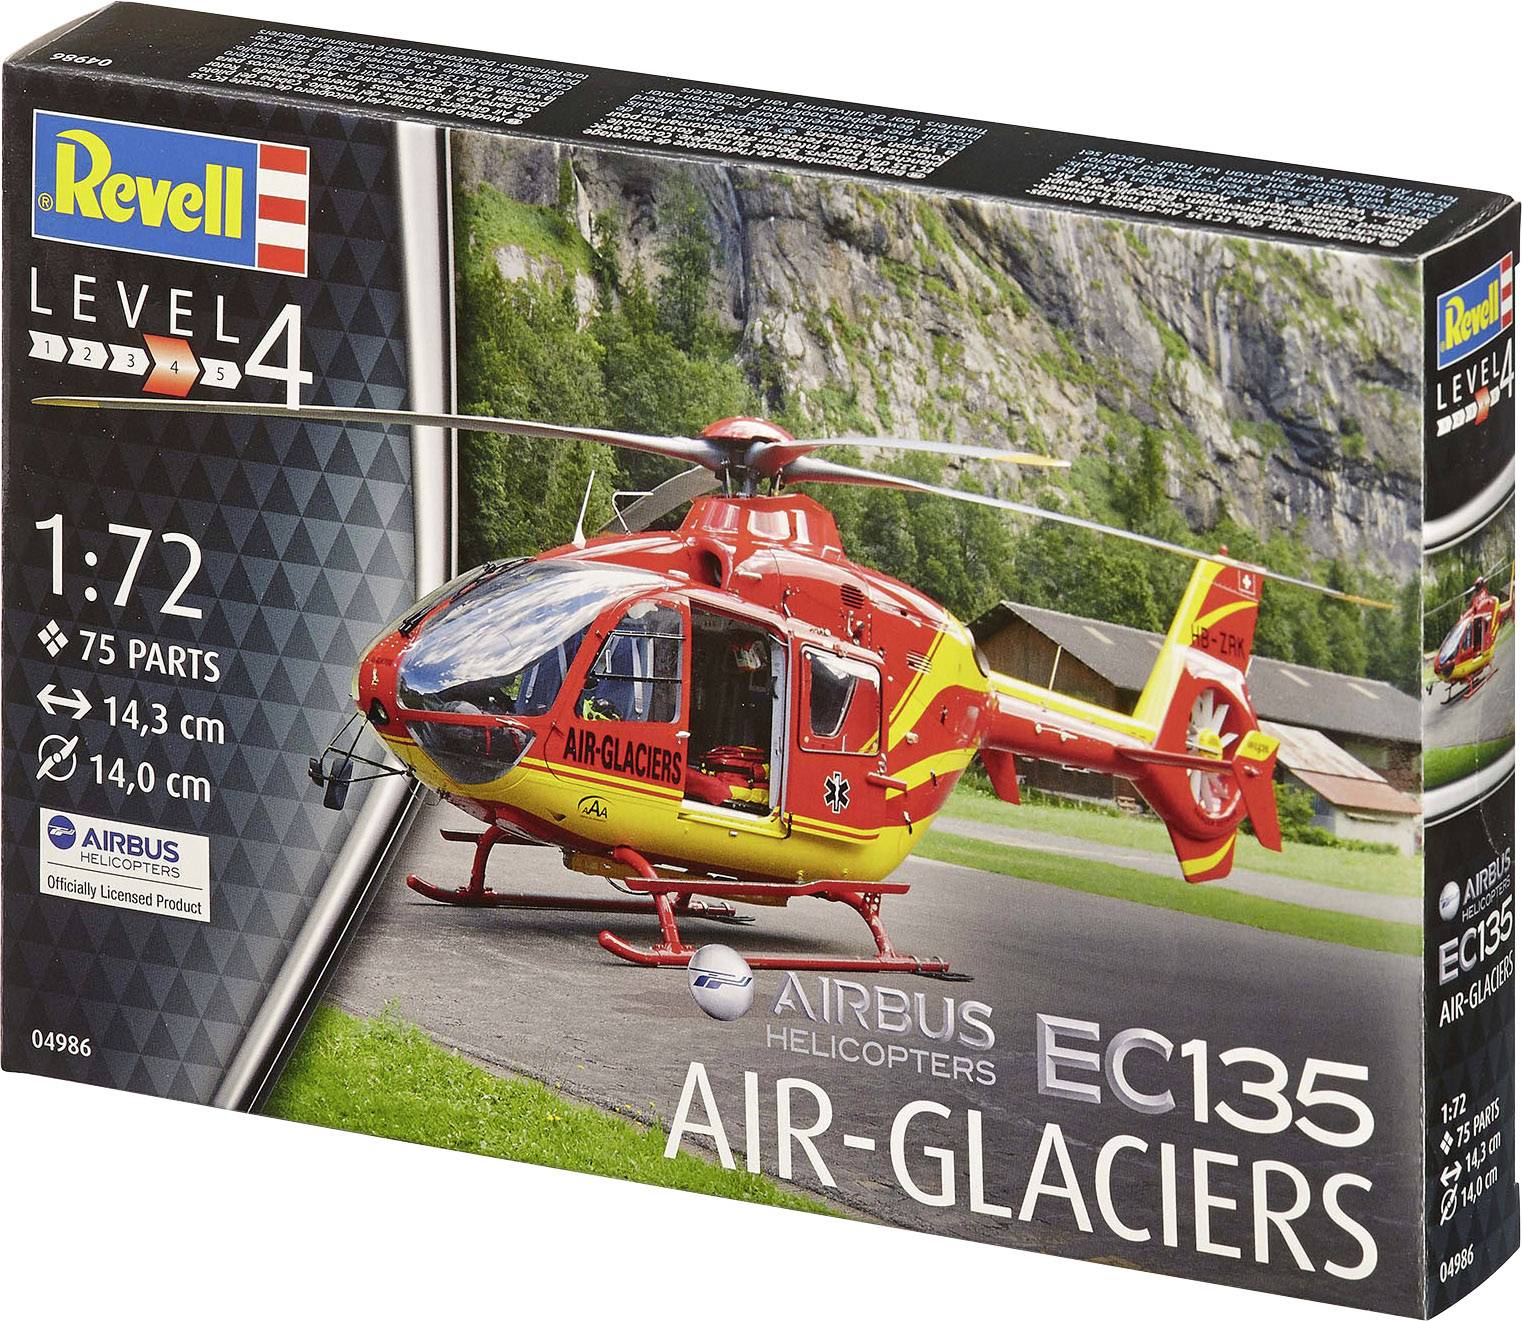 Revell 04986 Airbus Air-Glaciers Helikopter (bouwpakket) 1:72 ? Electronic